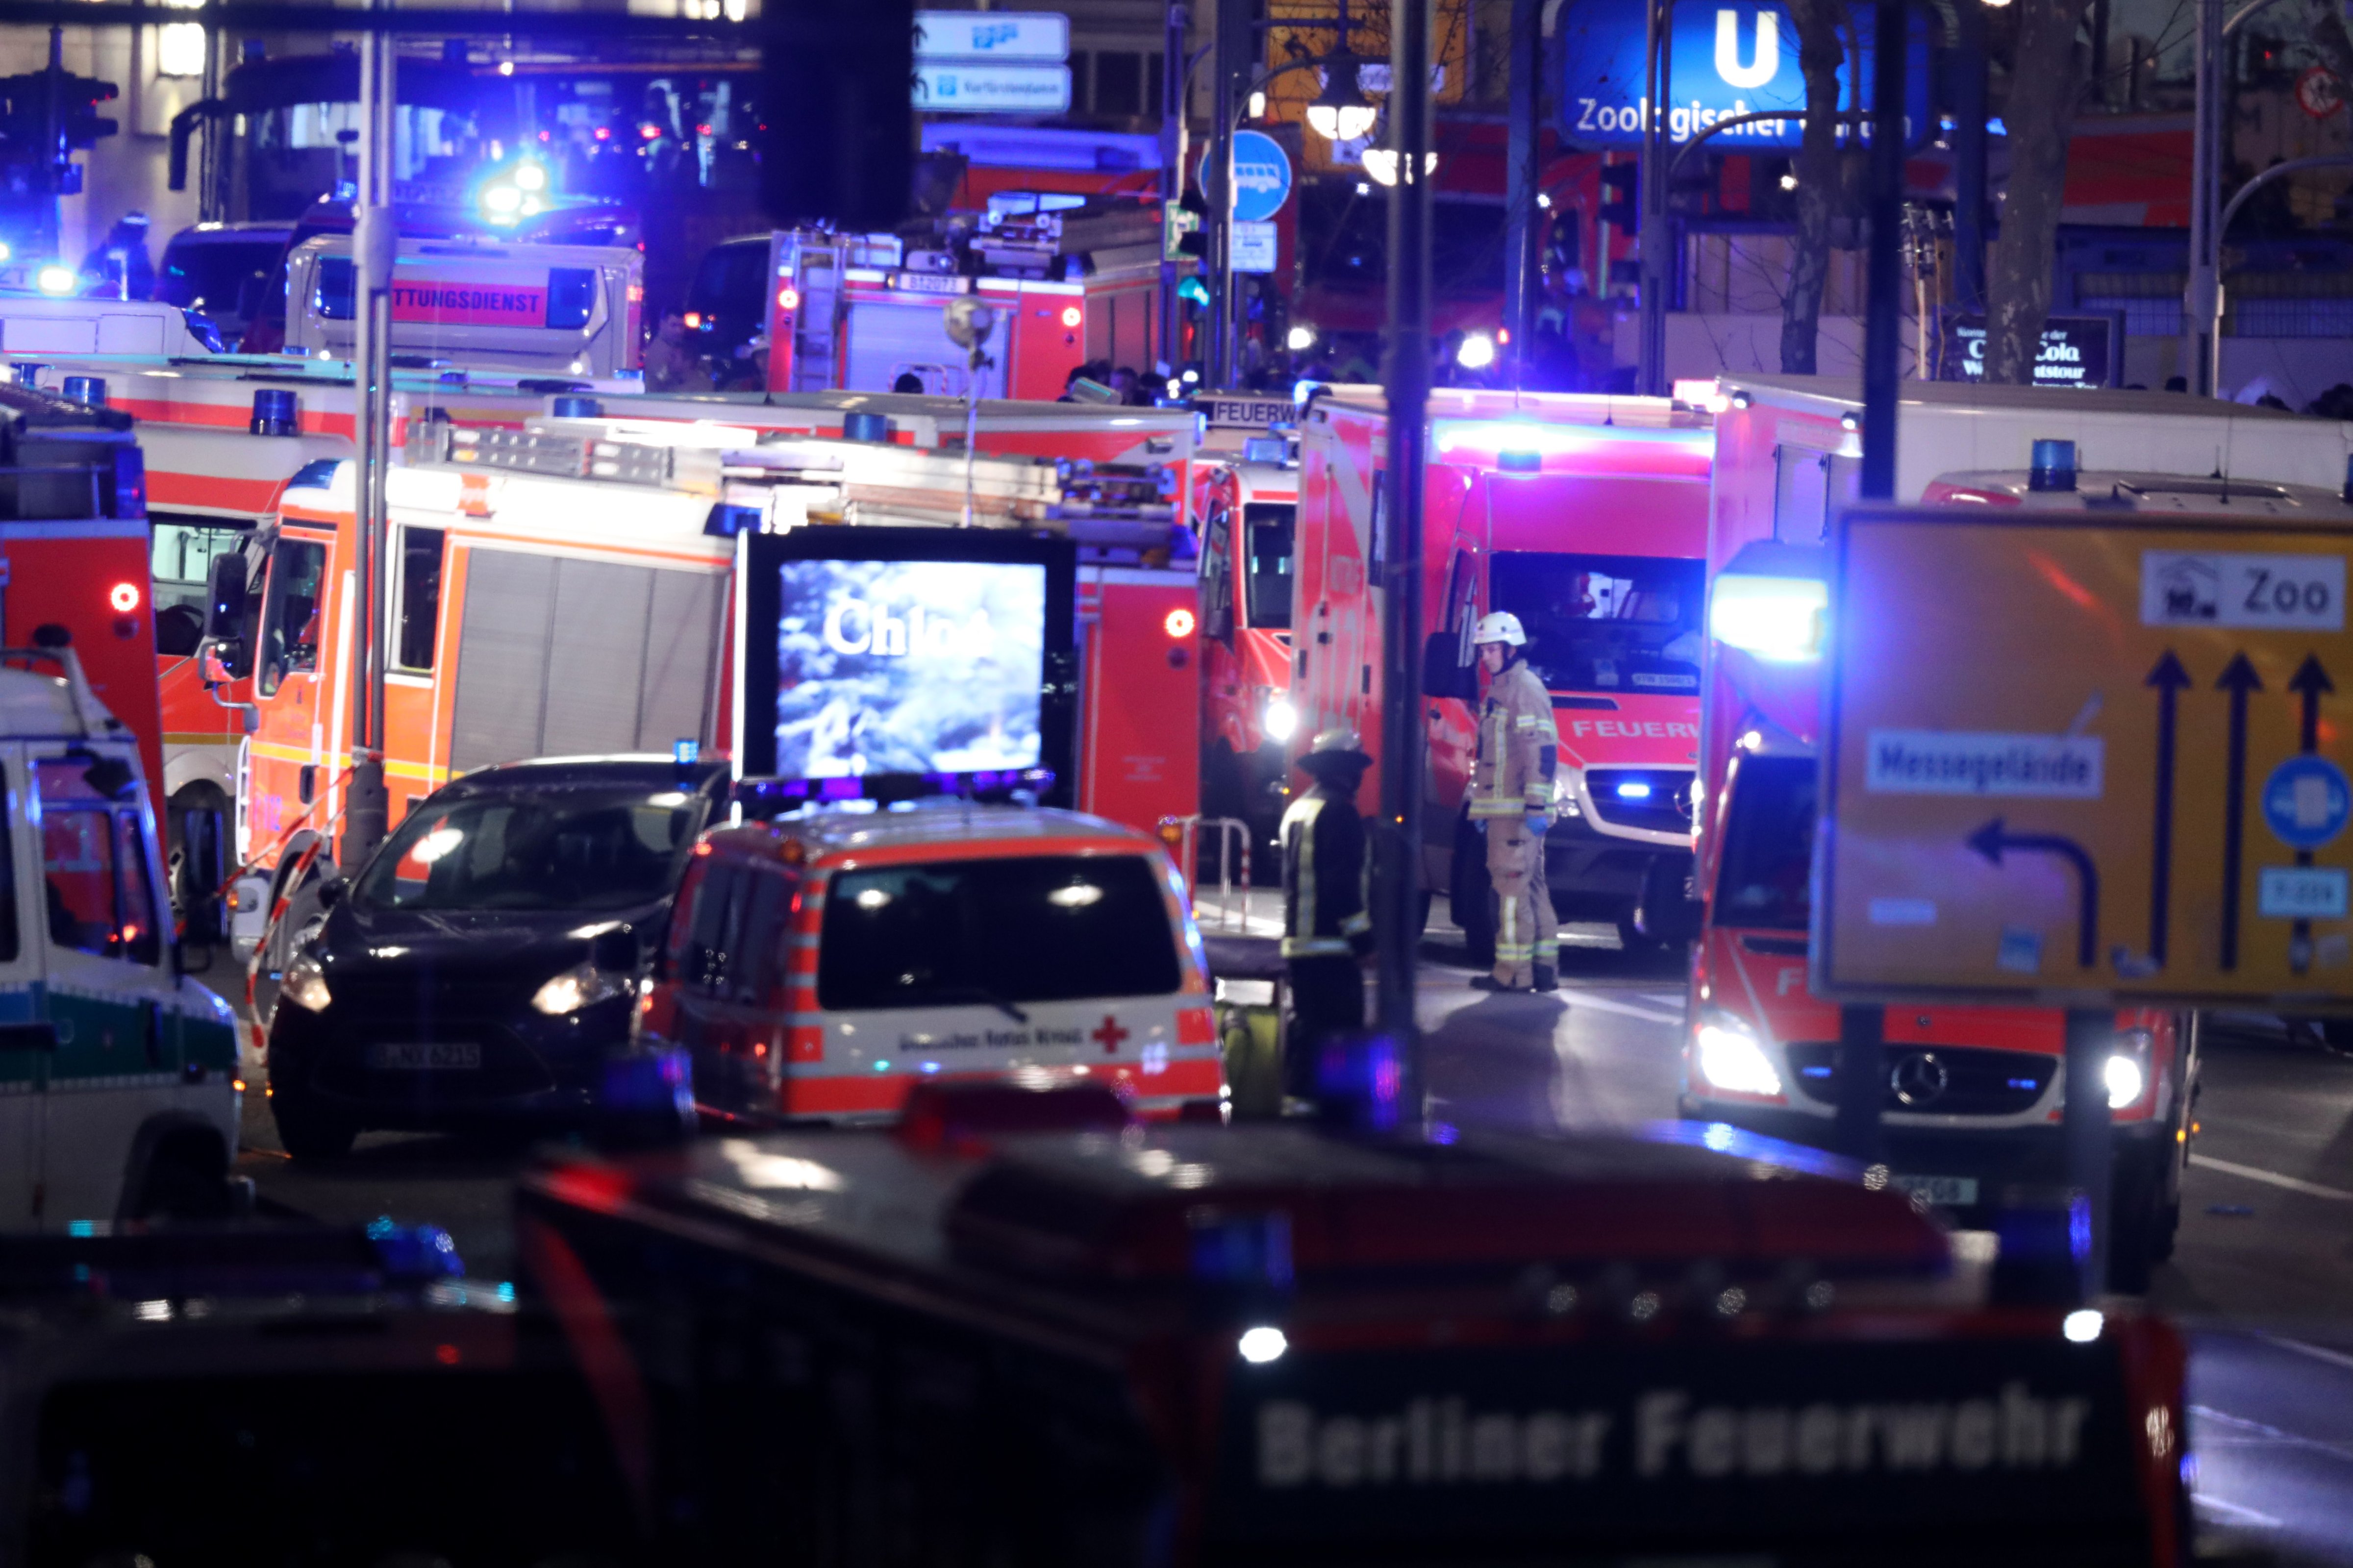 Ambulances line the streets as rescue workers tend to the area after a lorry truck plowed through a Christmas market on December 19, 2016 in Berlin, Germany. (Sean Gallup—Getty Images)